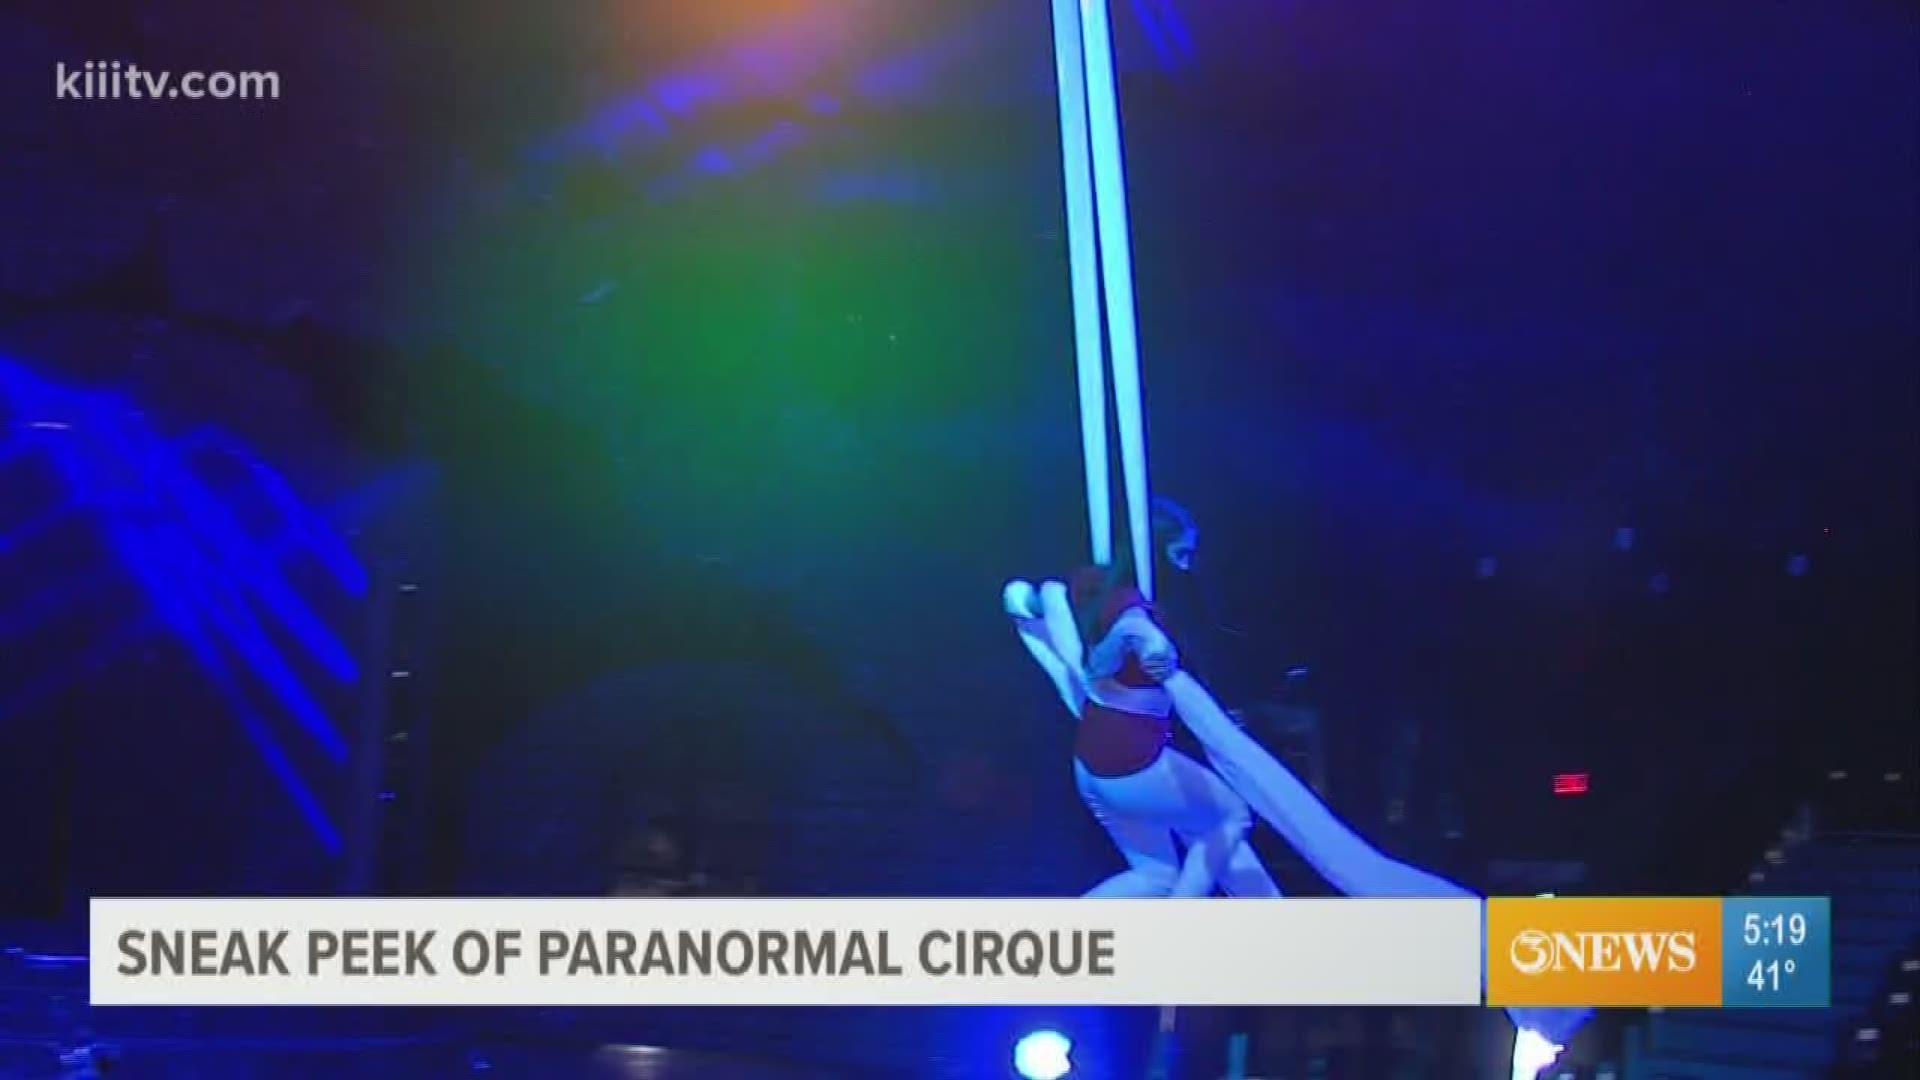 From acrobats to contortionists, Paranormal Cirque mixes horror, theatre, and magic - and is unlike any other traveling circus show.